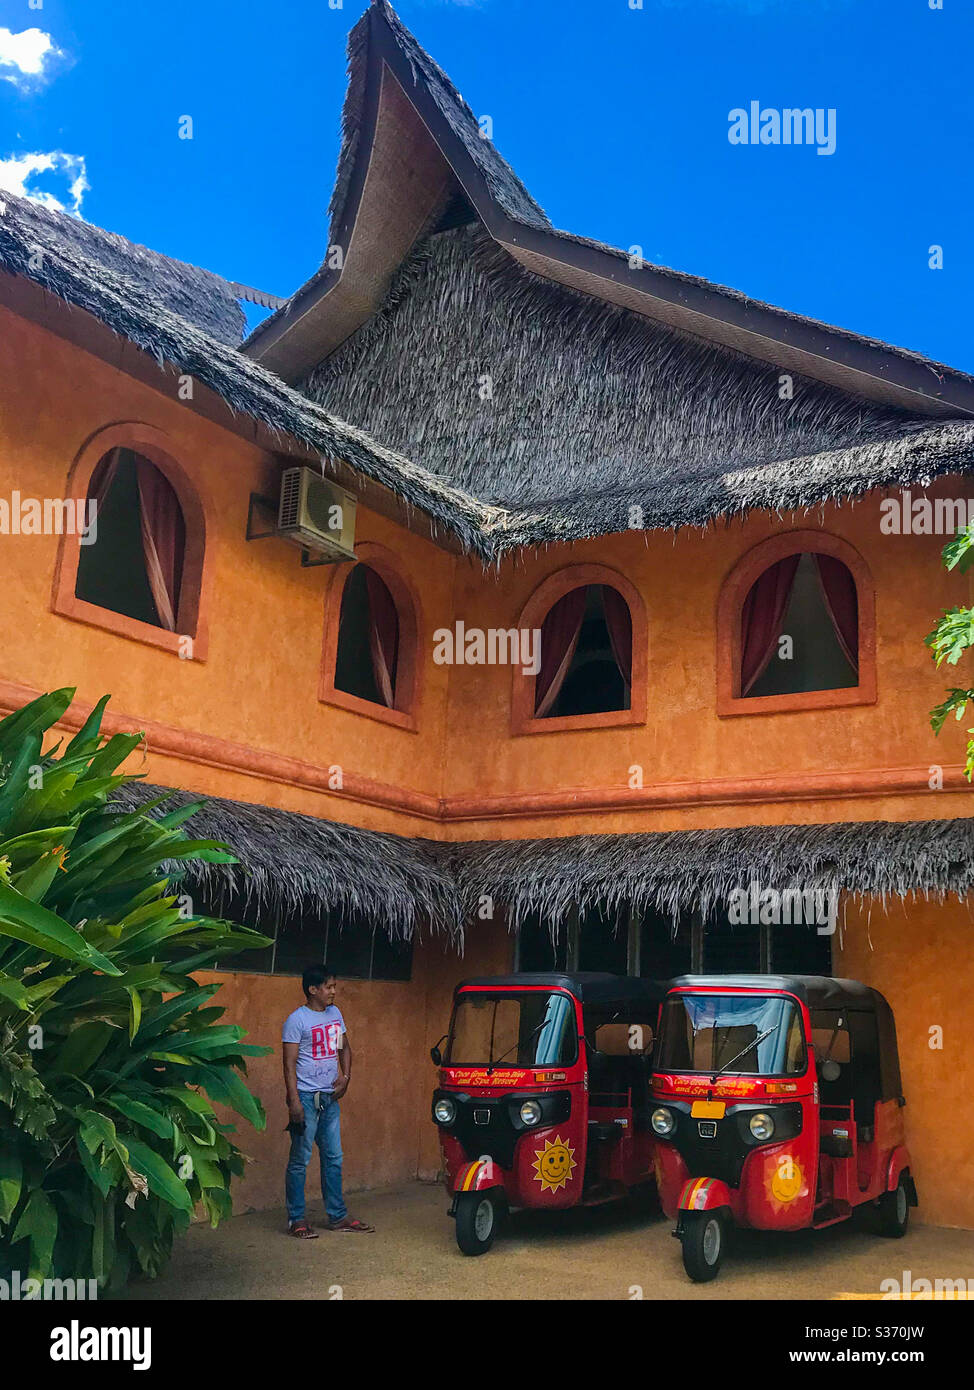 Man stands next to two tricycles in front of an orange building in Siquijor, Philippines. Stock Photo